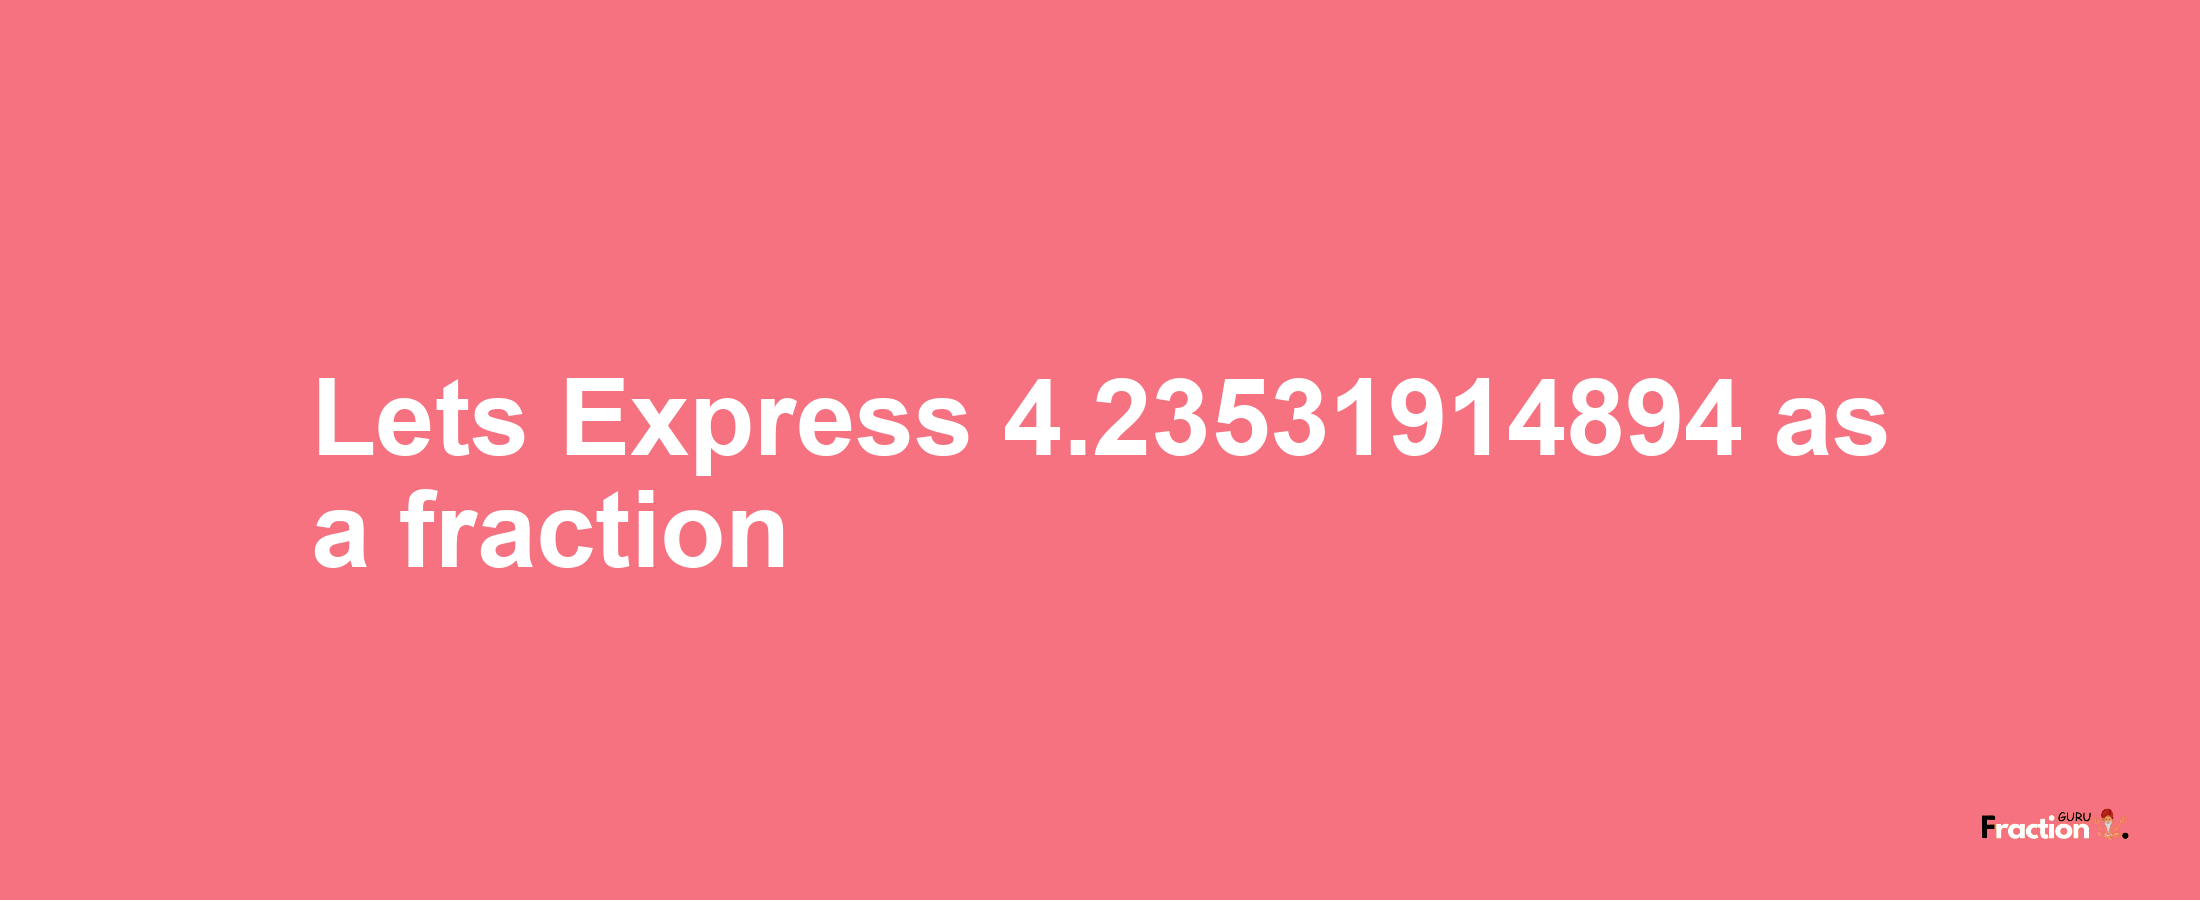 Lets Express 4.23531914894 as afraction